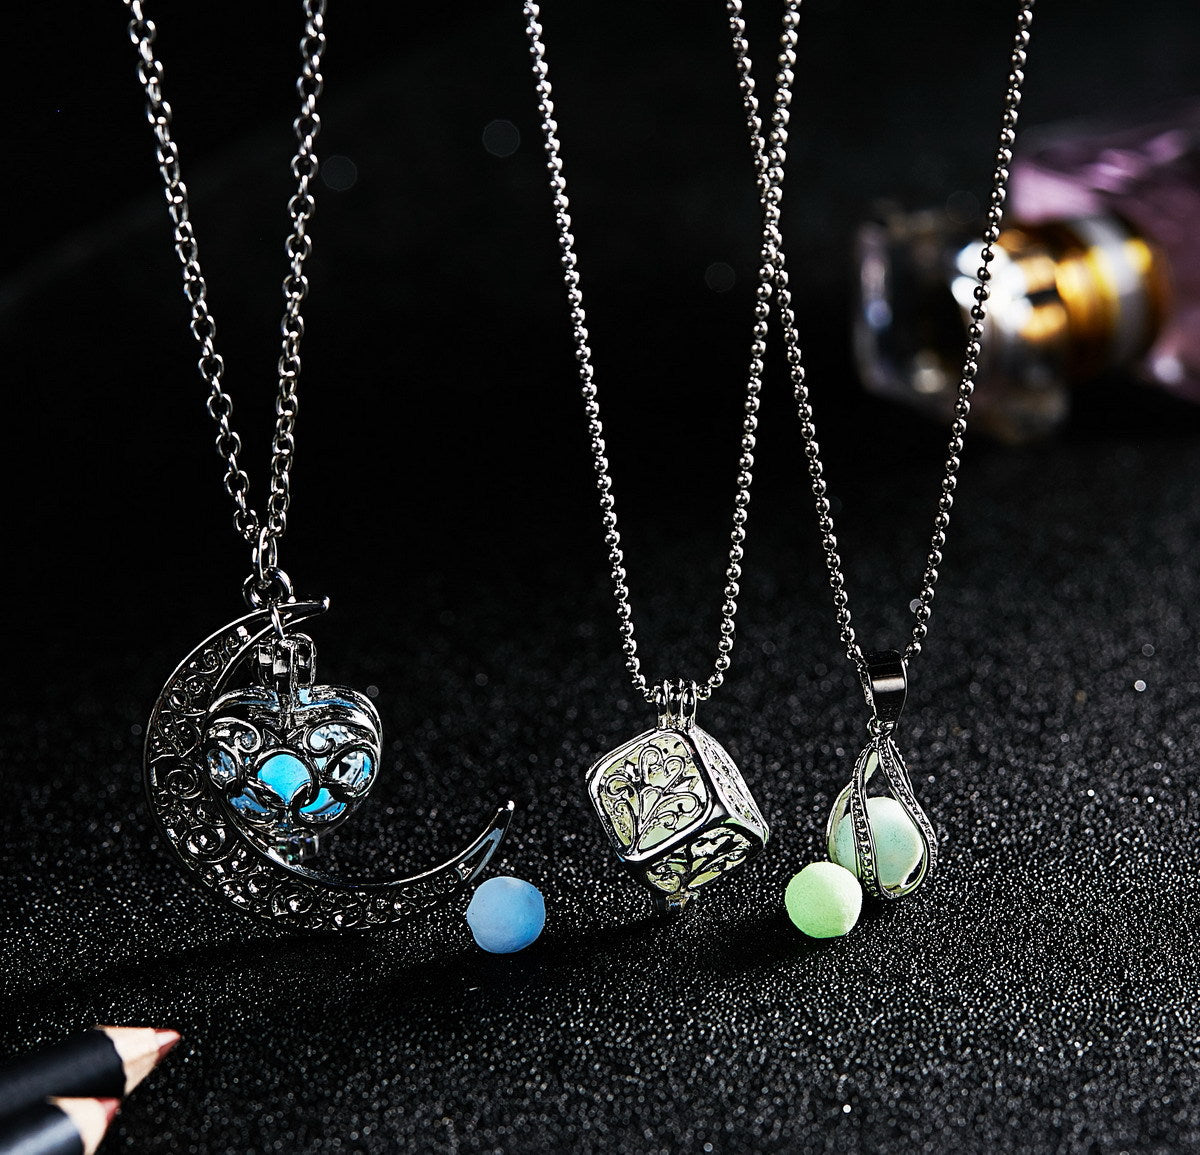 Glow In The Dark Necklace Moon Square Heart Necklaces For Woman Hollow Water Drop Pendant Night Fluorescence Light Accessories